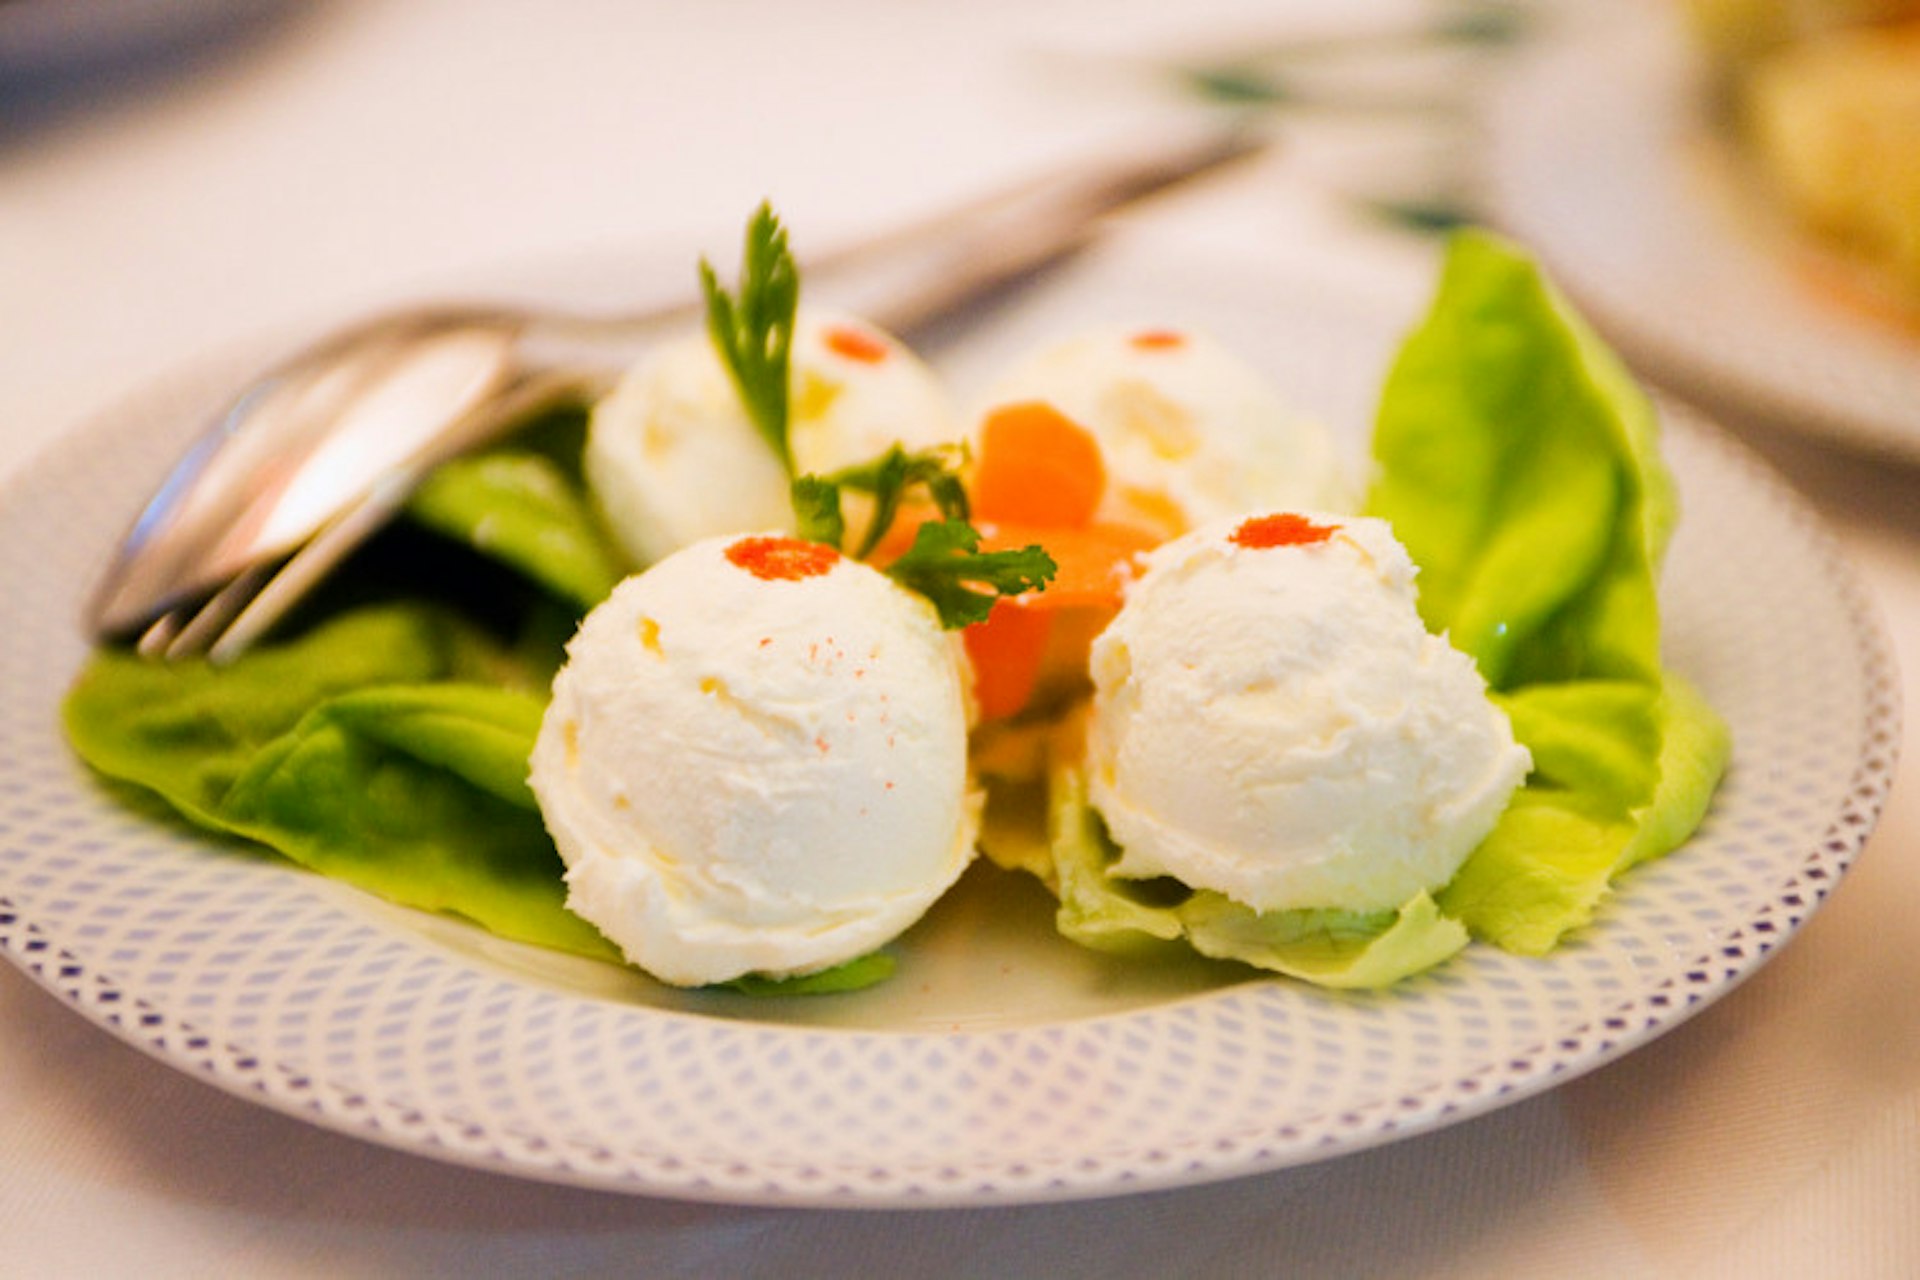 Kaymak balls served at a Belgrade restaurant. Image by Greg Elms / Lonely Planet Images/ Getty Images